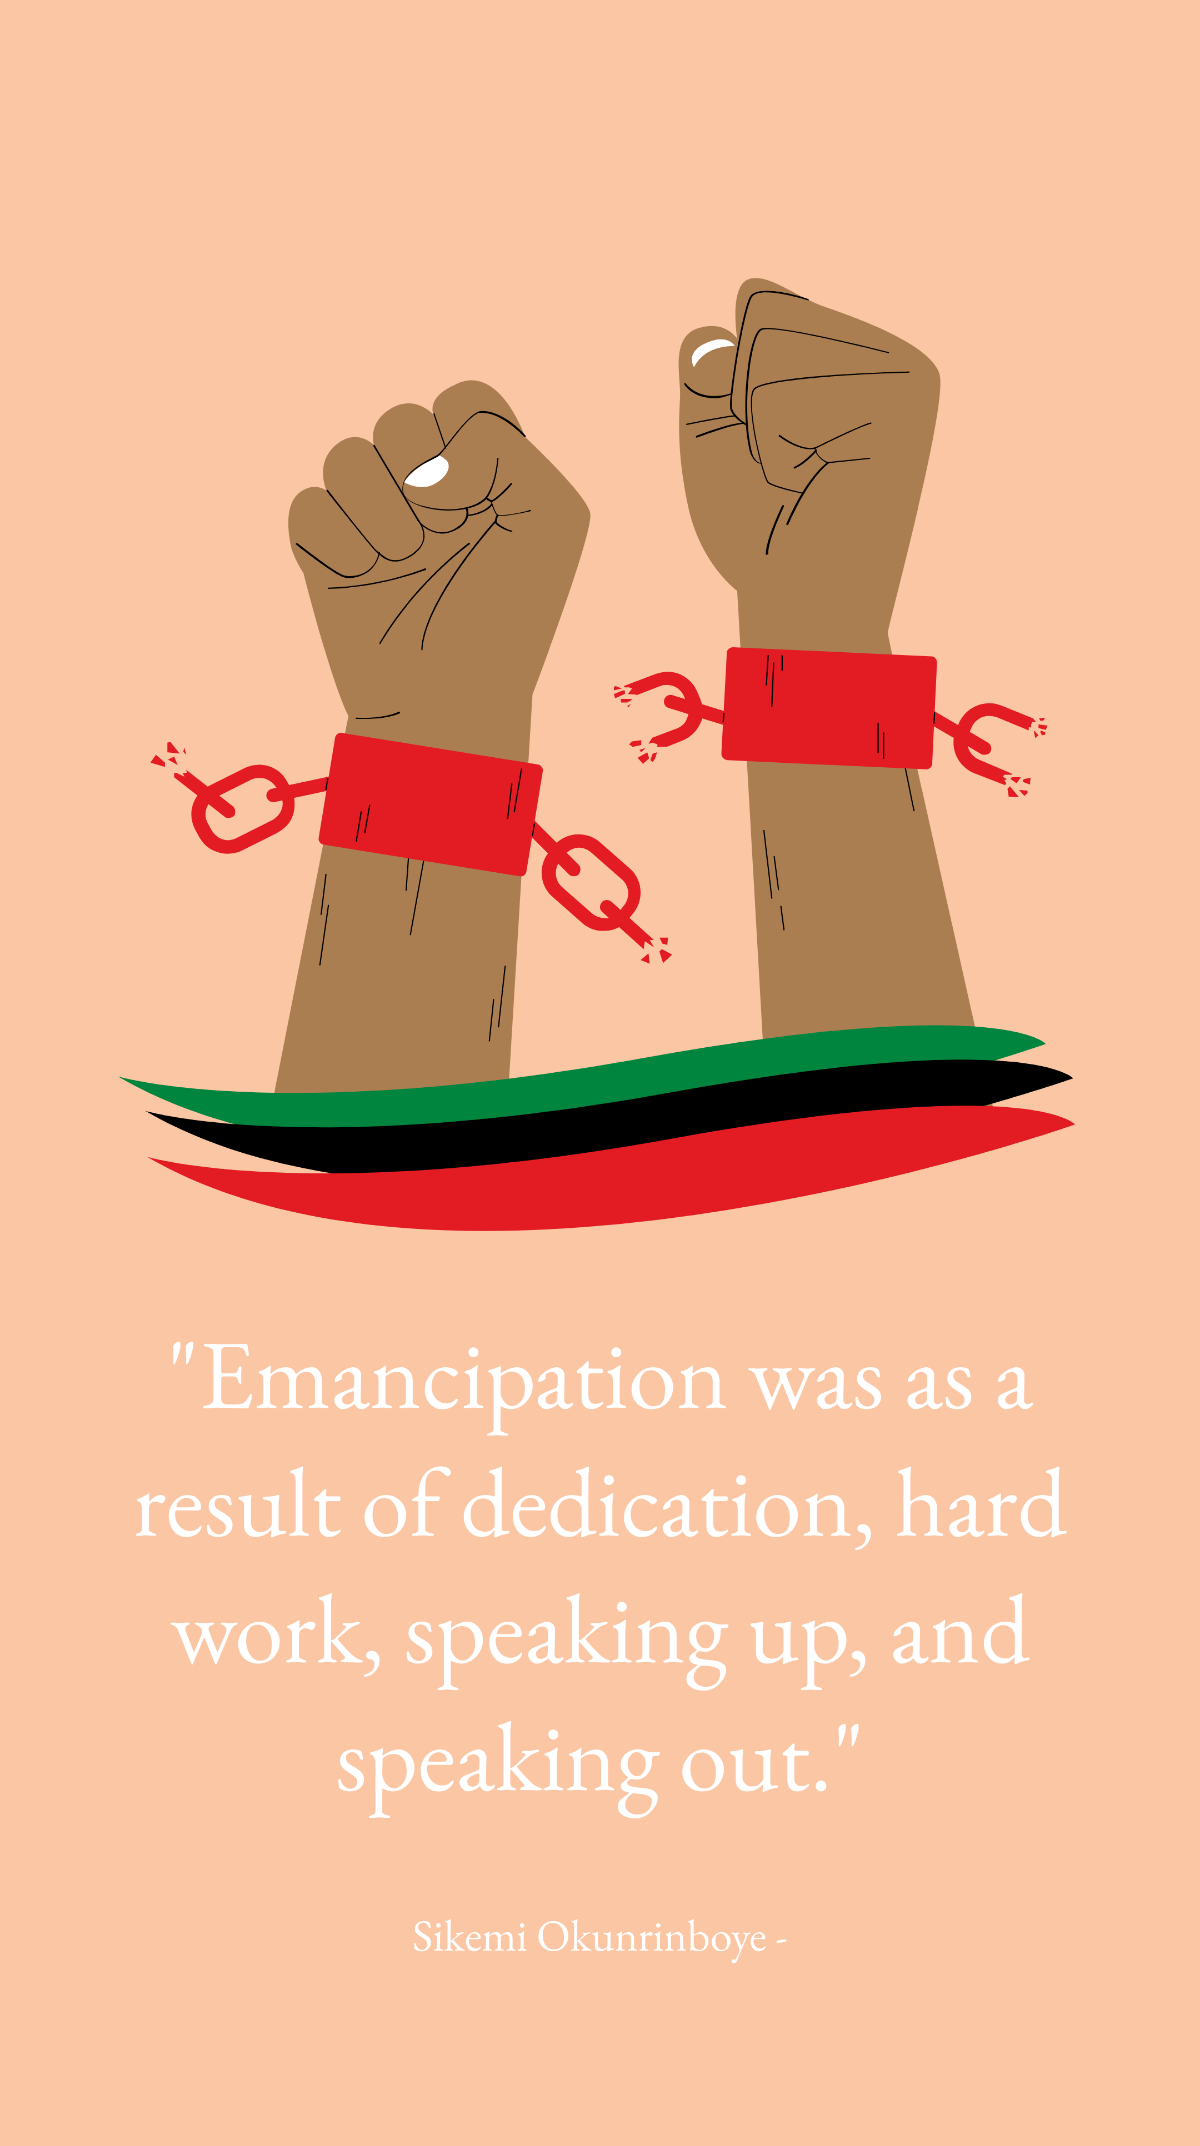 Sikemi Okunrinboye - Emancipation was as a result of dedication, hard work, speaking up, and speaking out. Template